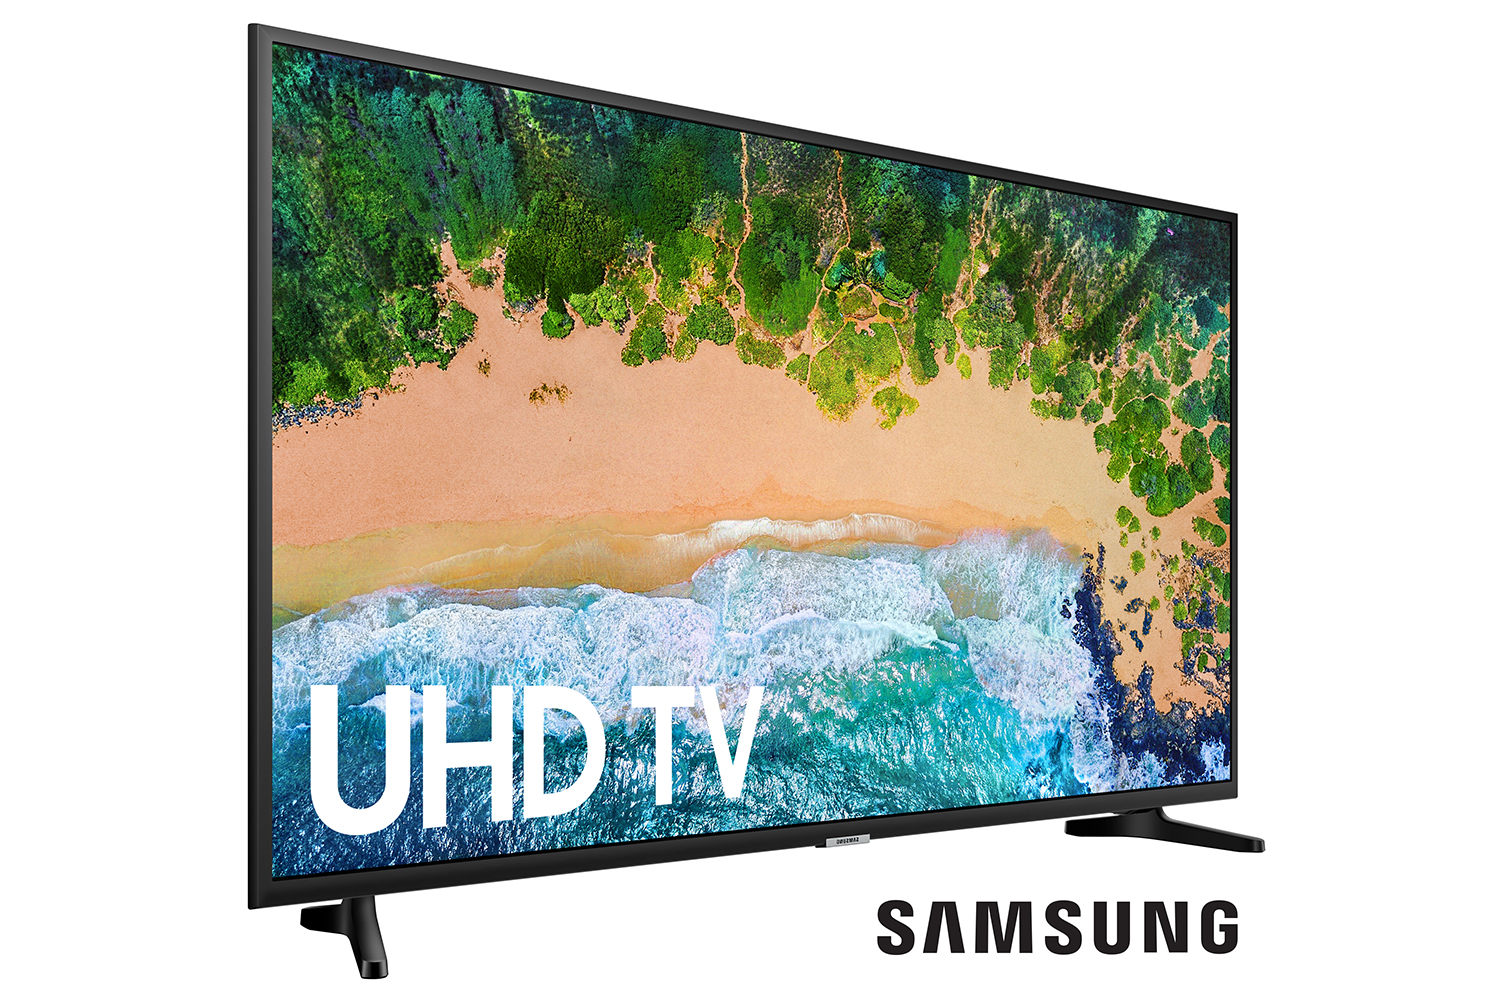 SAMSUNG 43" Class 4K UHD 2160p LED Smart TV with HDR UN43NU6900 - image 4 of 23